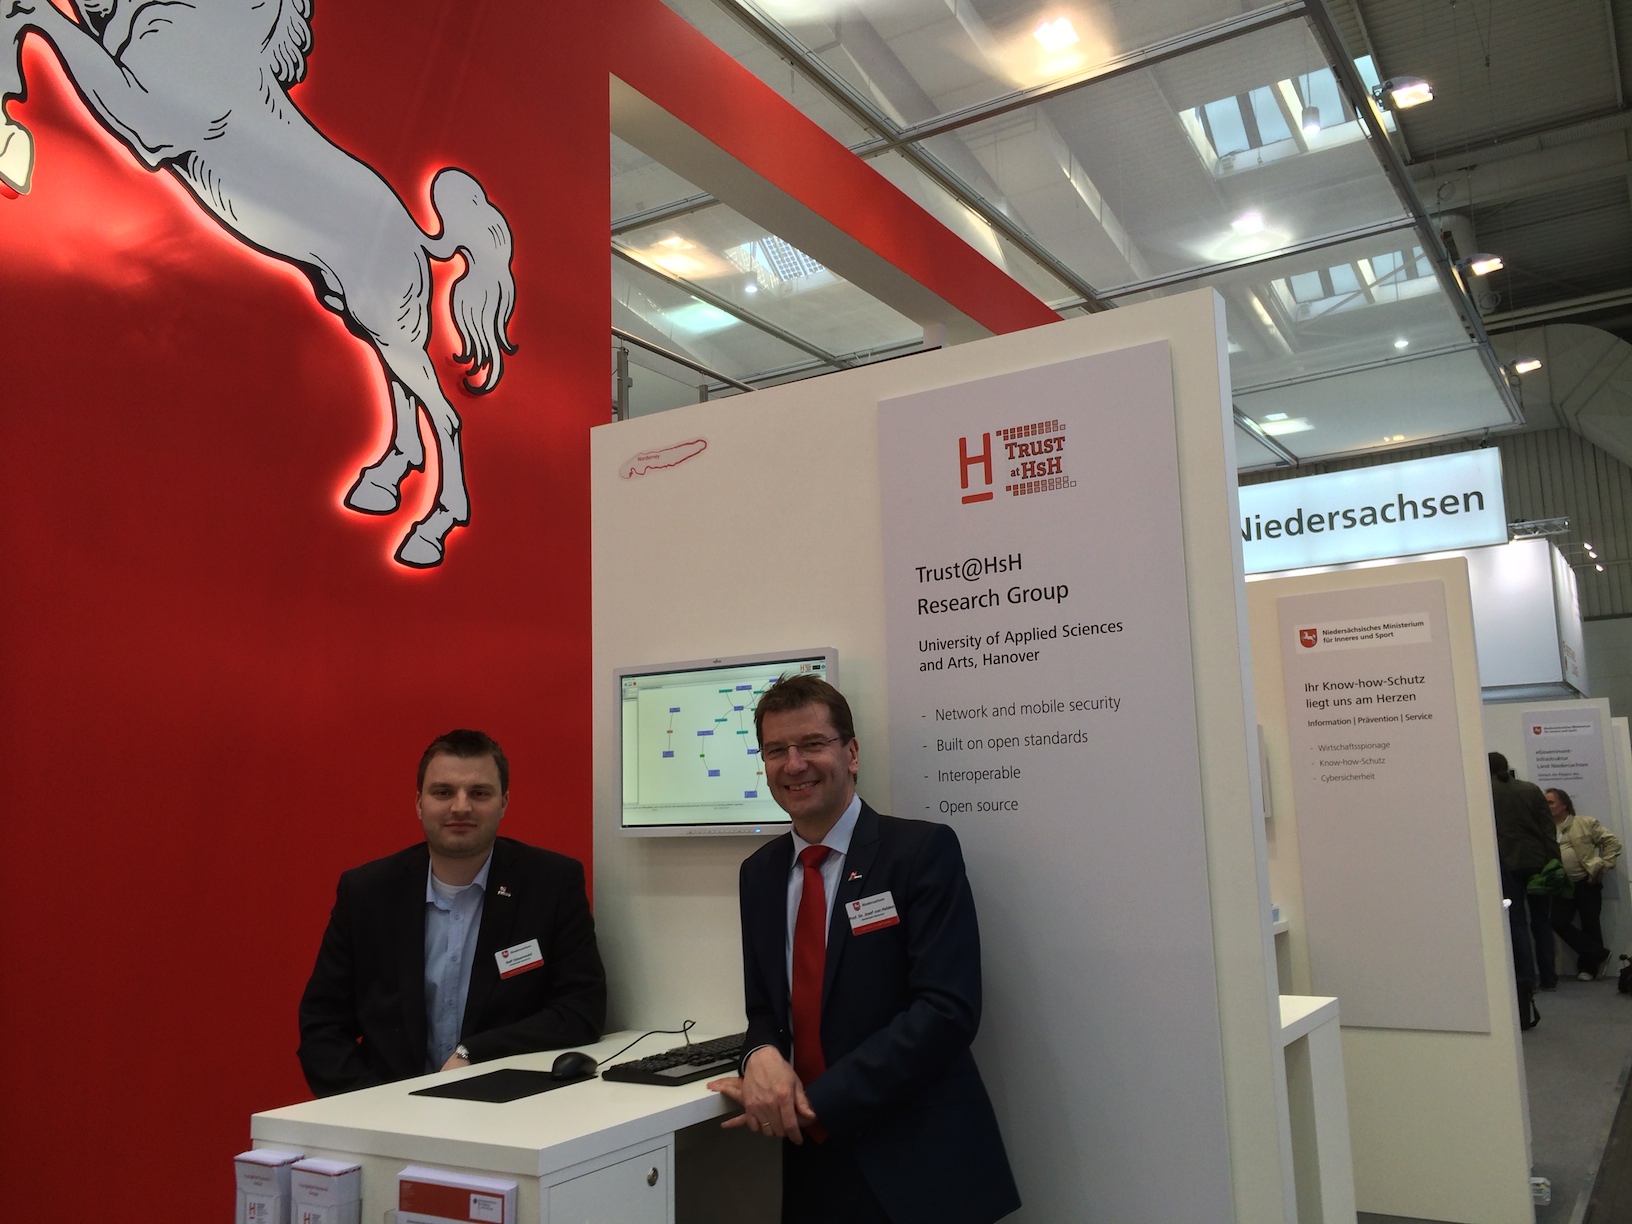 Booth of Trust@HsH at Cebit 2014